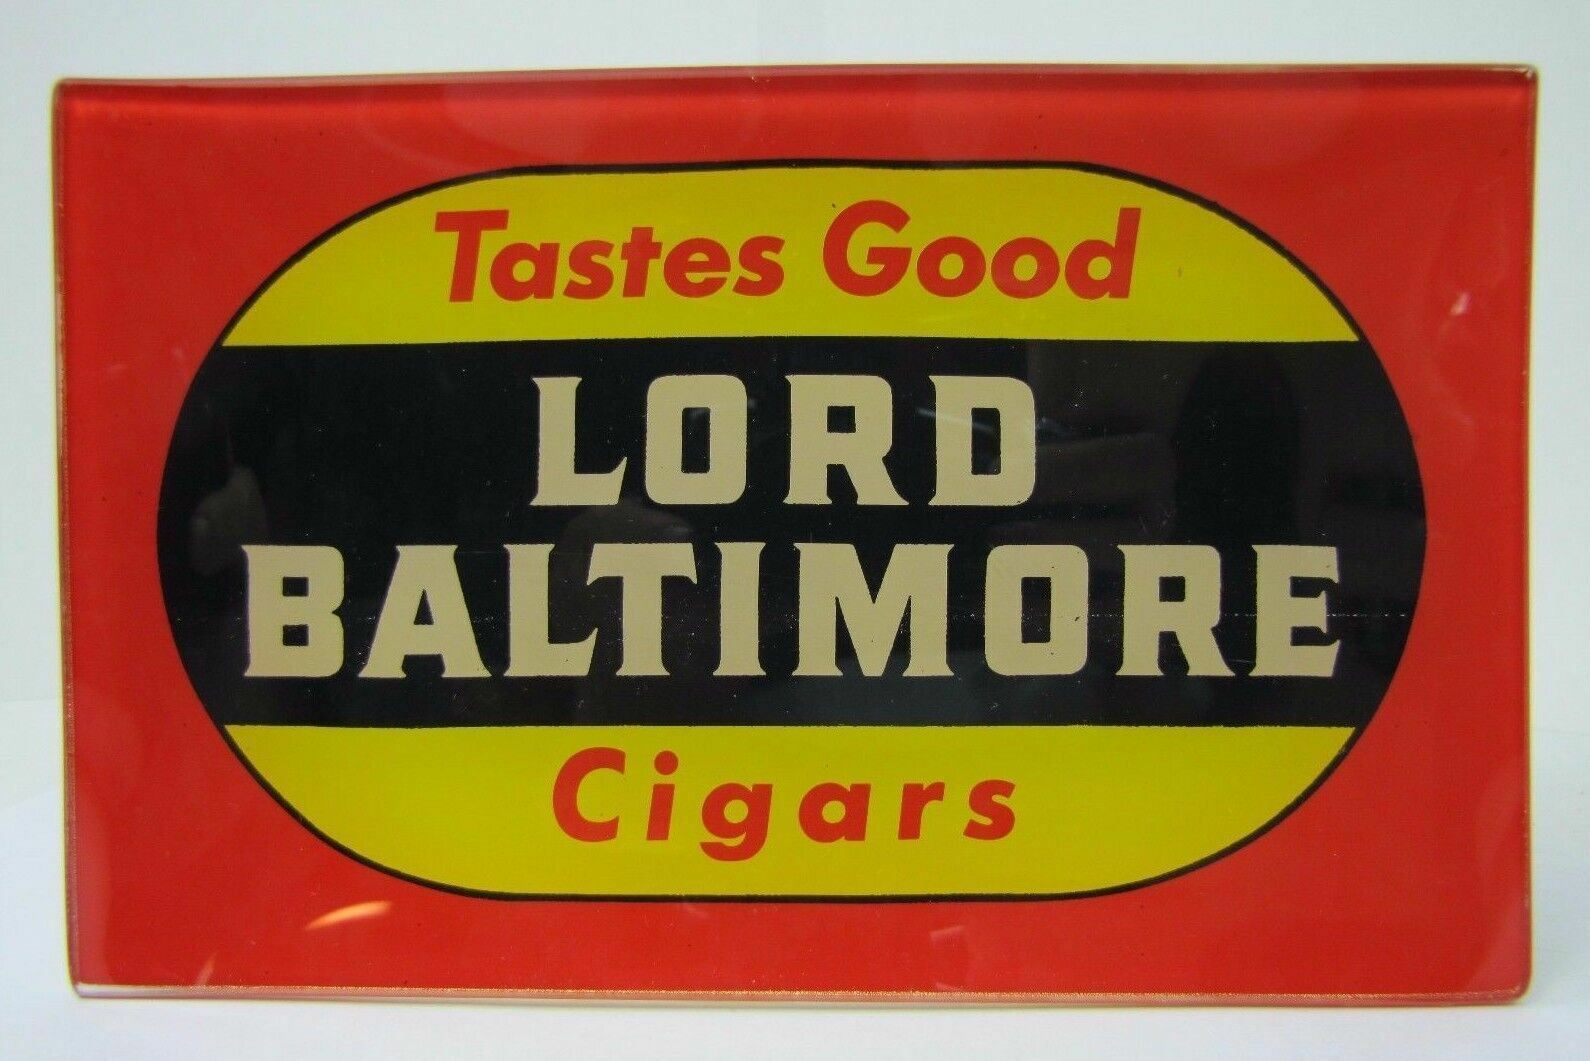 LORD BALTIMORE CIGARS Advertising Tip Coin Card Glass Tray 'Tastes Good'